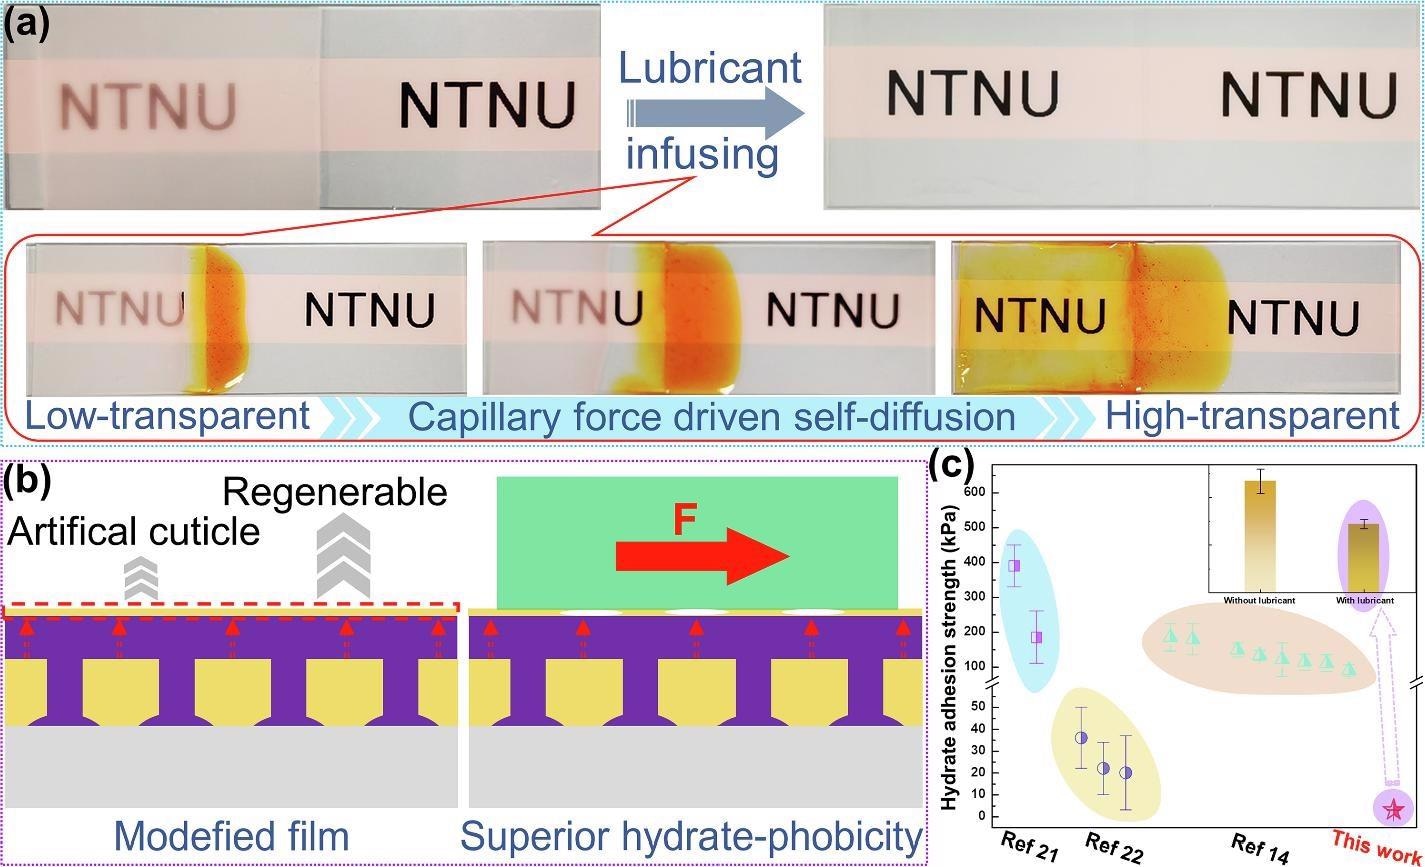 Cuticle mimicking layer on the onion inspired coating with superior hydrate-phobicity.